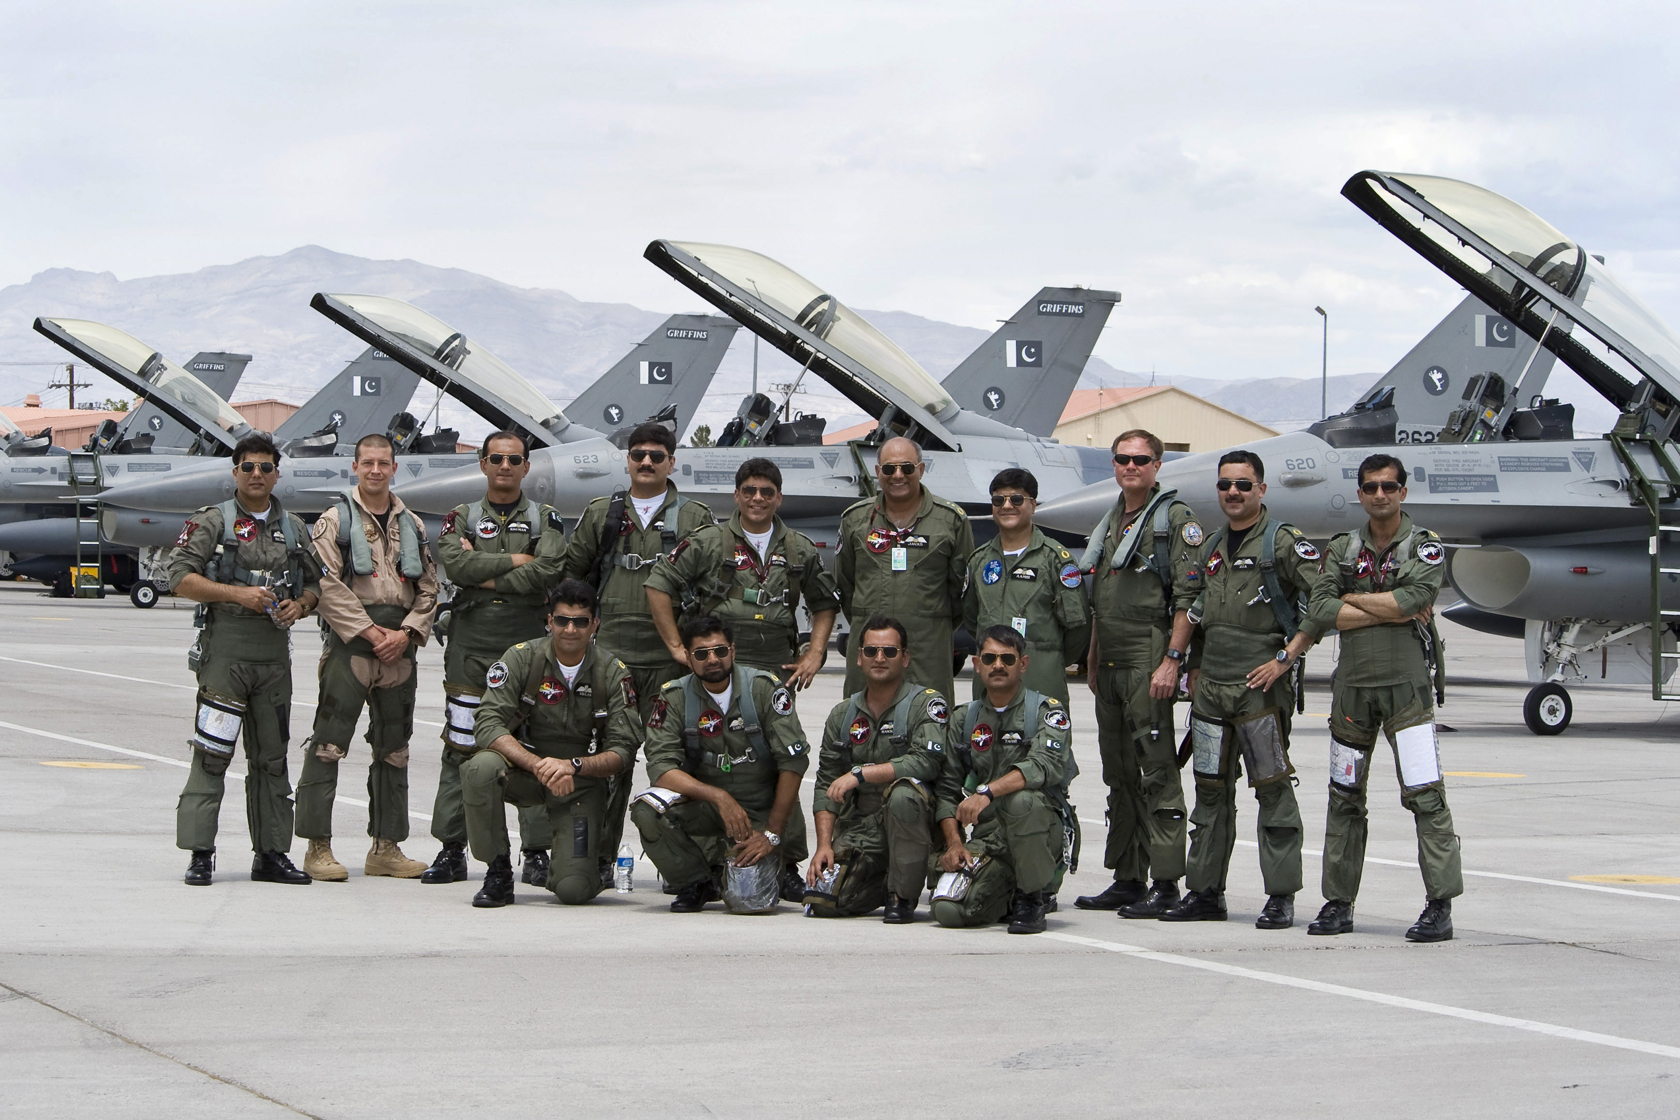 Pakistan_Air_Force_F-16_Red_Flag_2010_group_photo.jpg